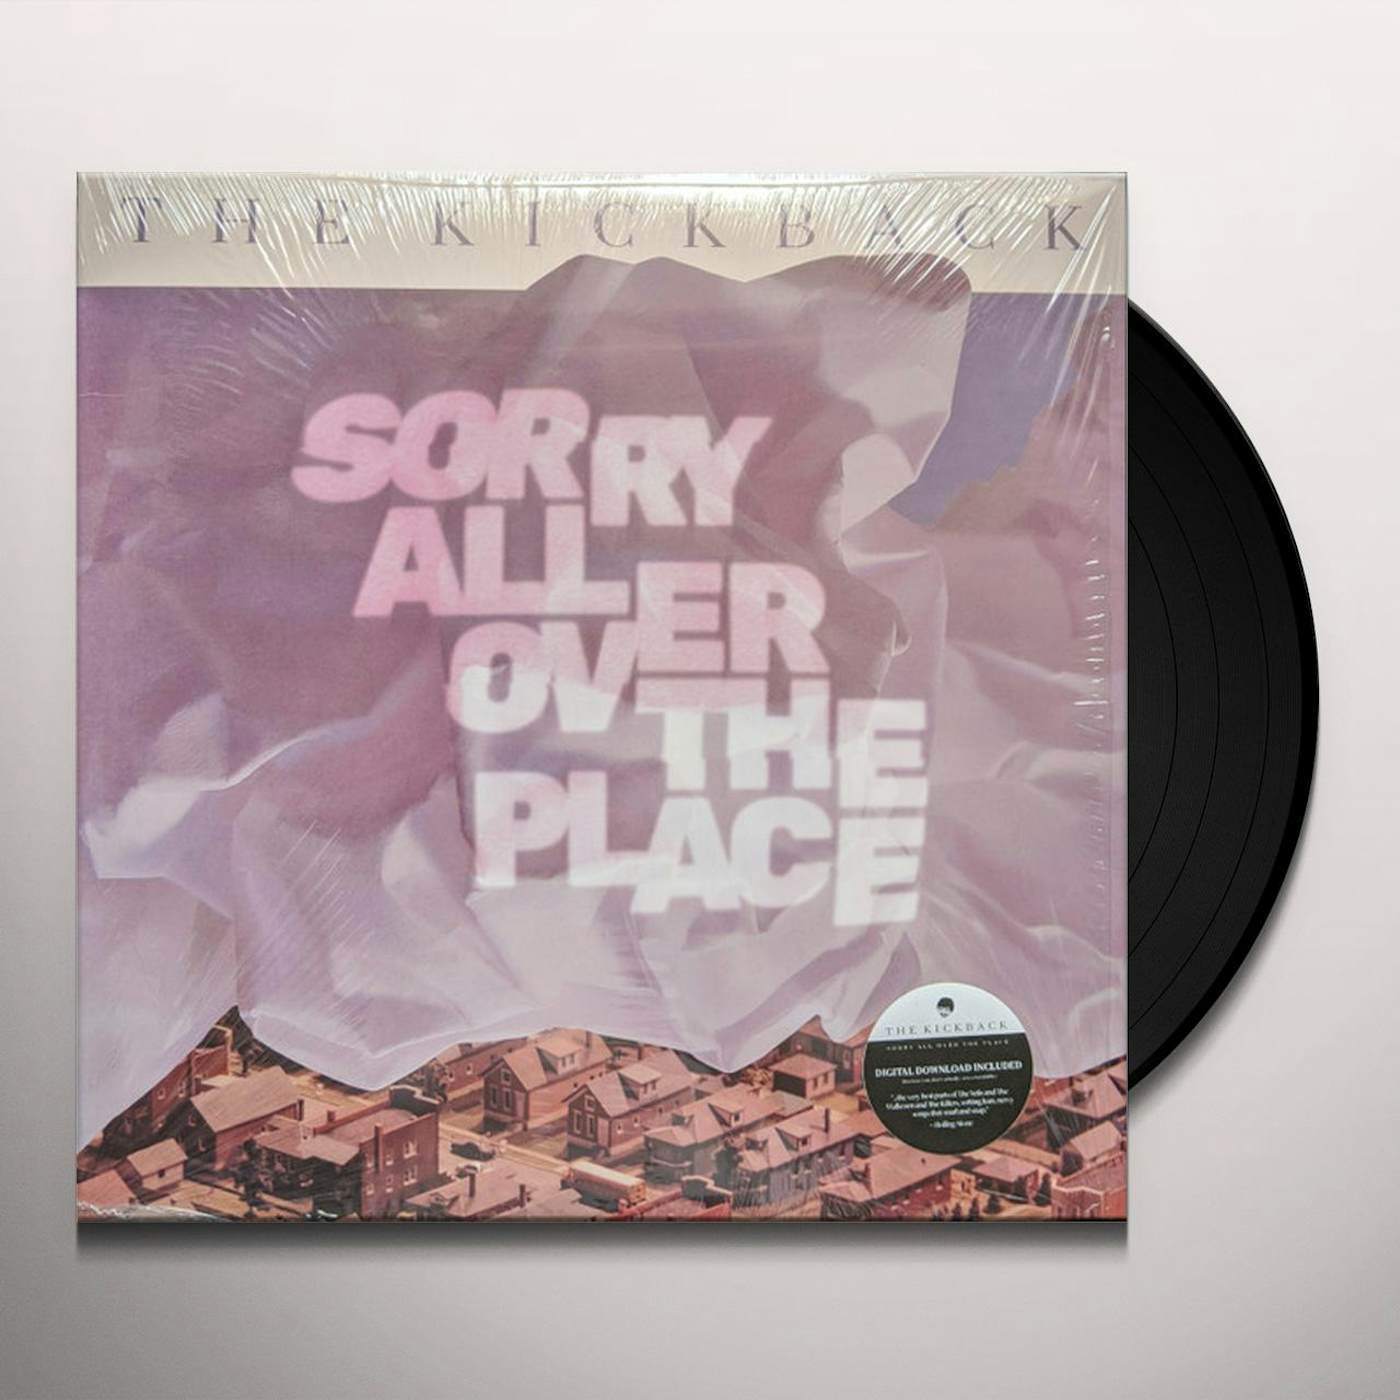 Kickback SORRY ALL OVER THE PLACE Vinyl Record